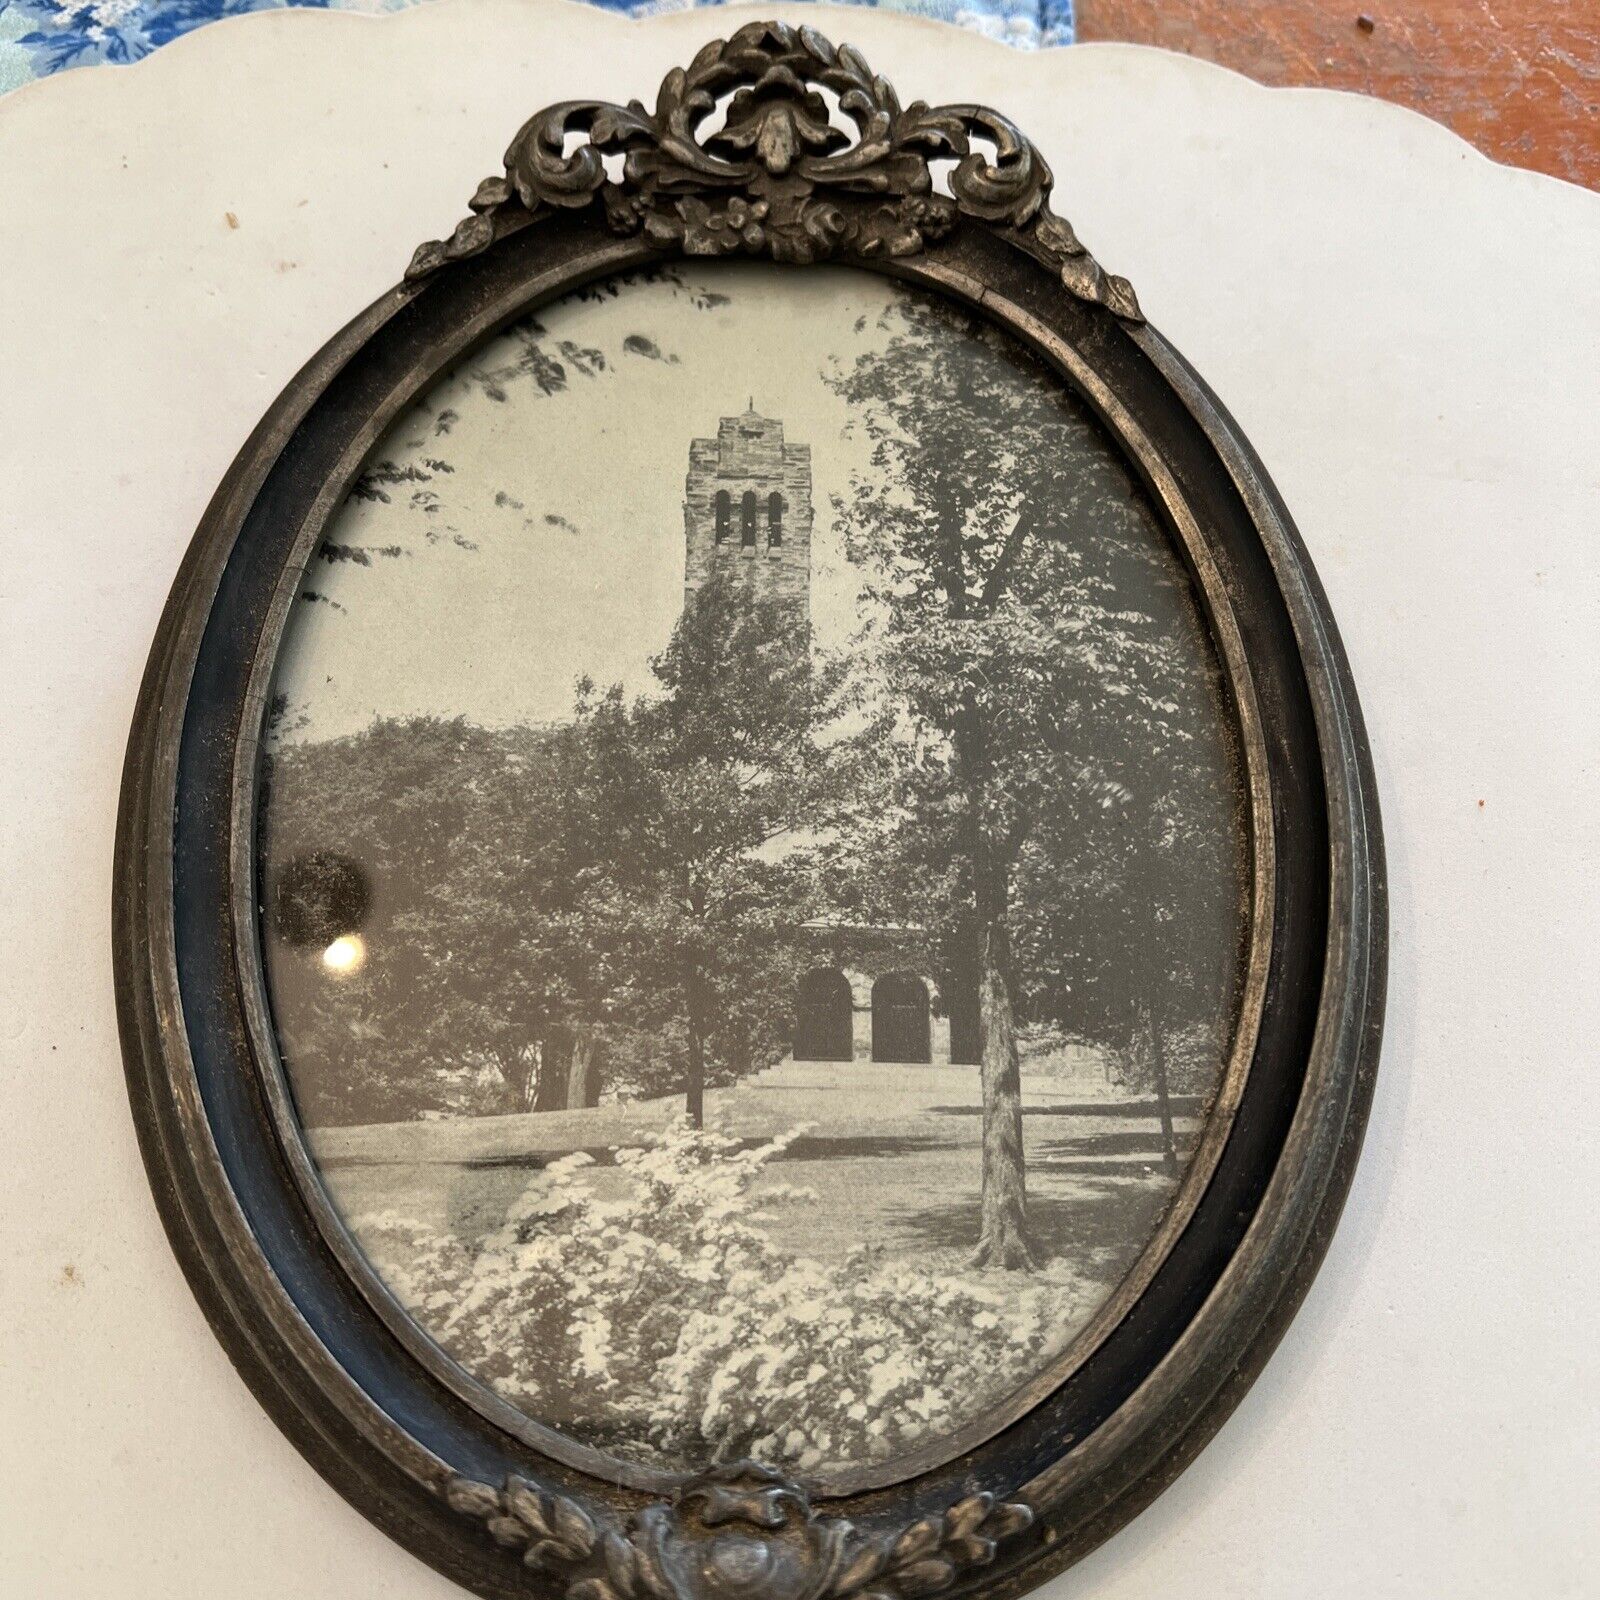 1947 PHOTOGRAPH TUFTS COLLEGE CHAPEL WITH FRAME